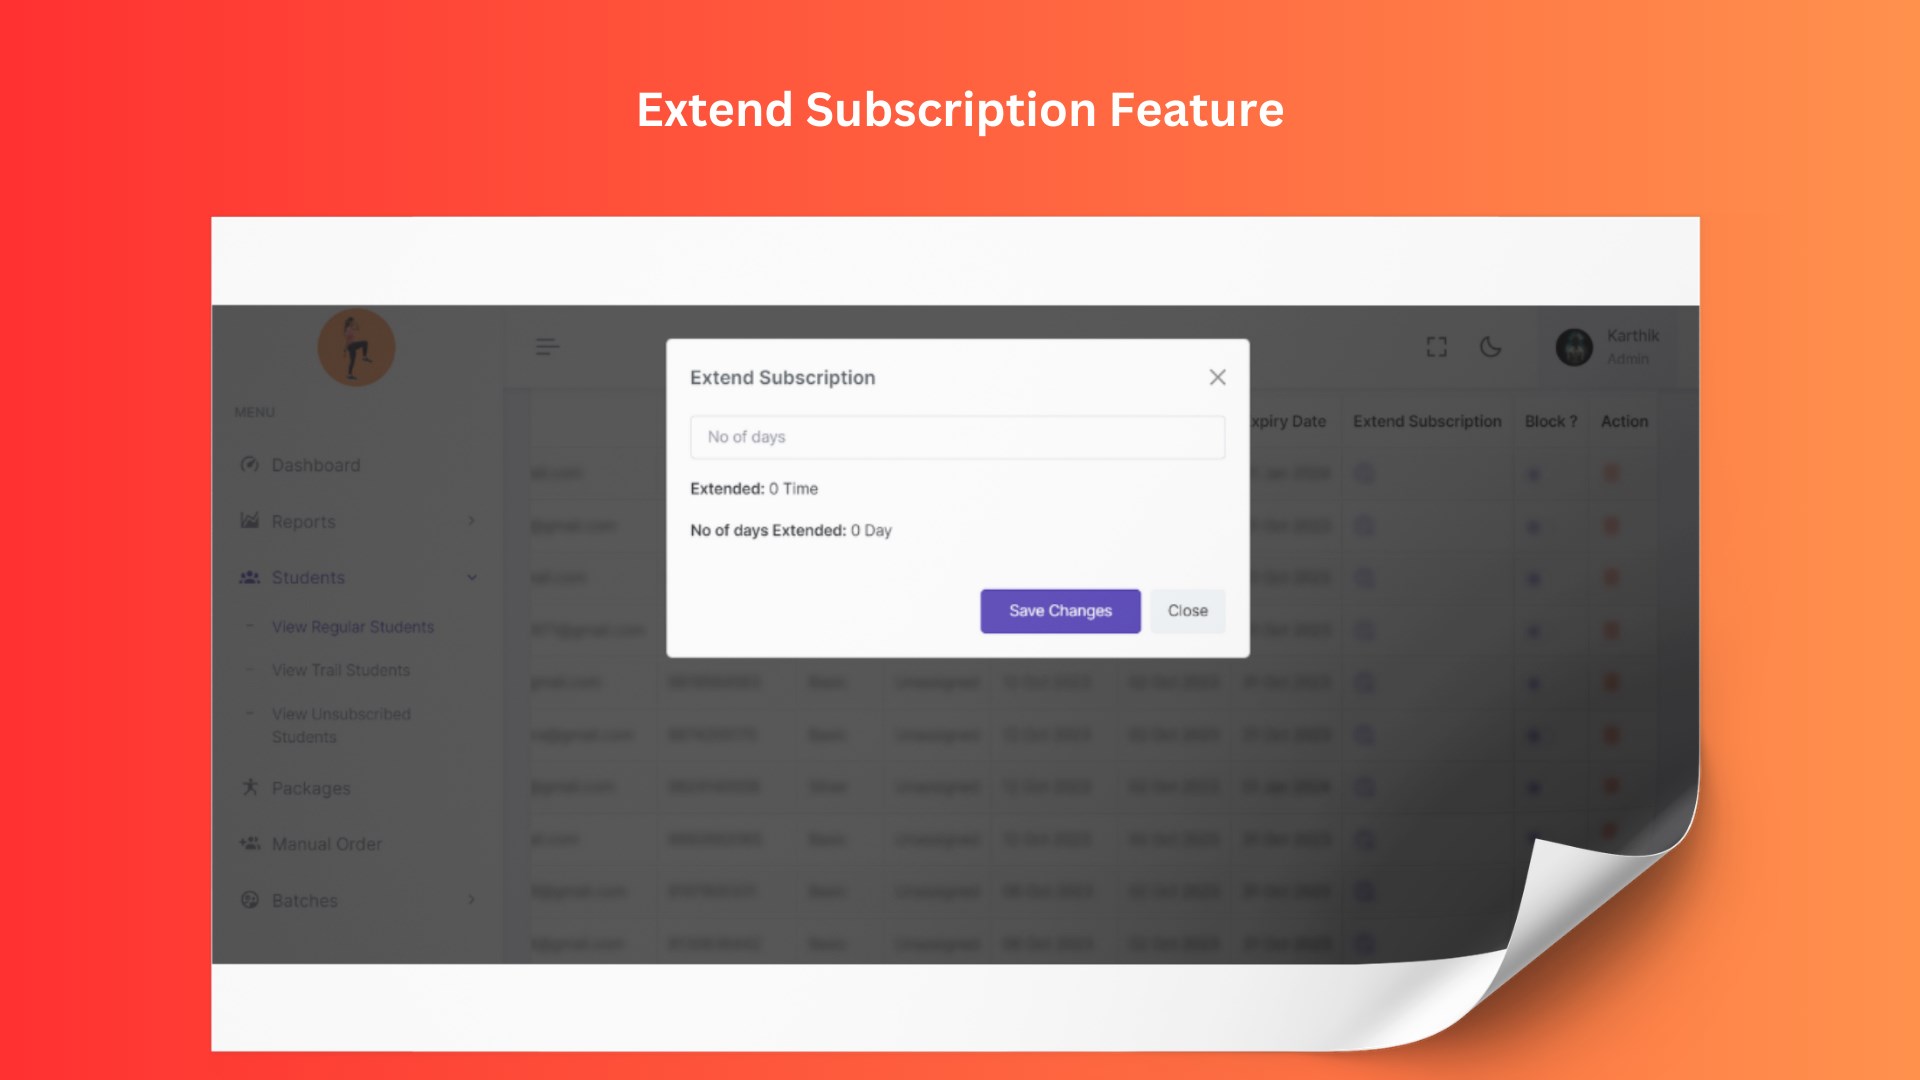 Feature to extend the subscription period of a student, with additional functionality to keep track of the extended subscription time along with detailed information.